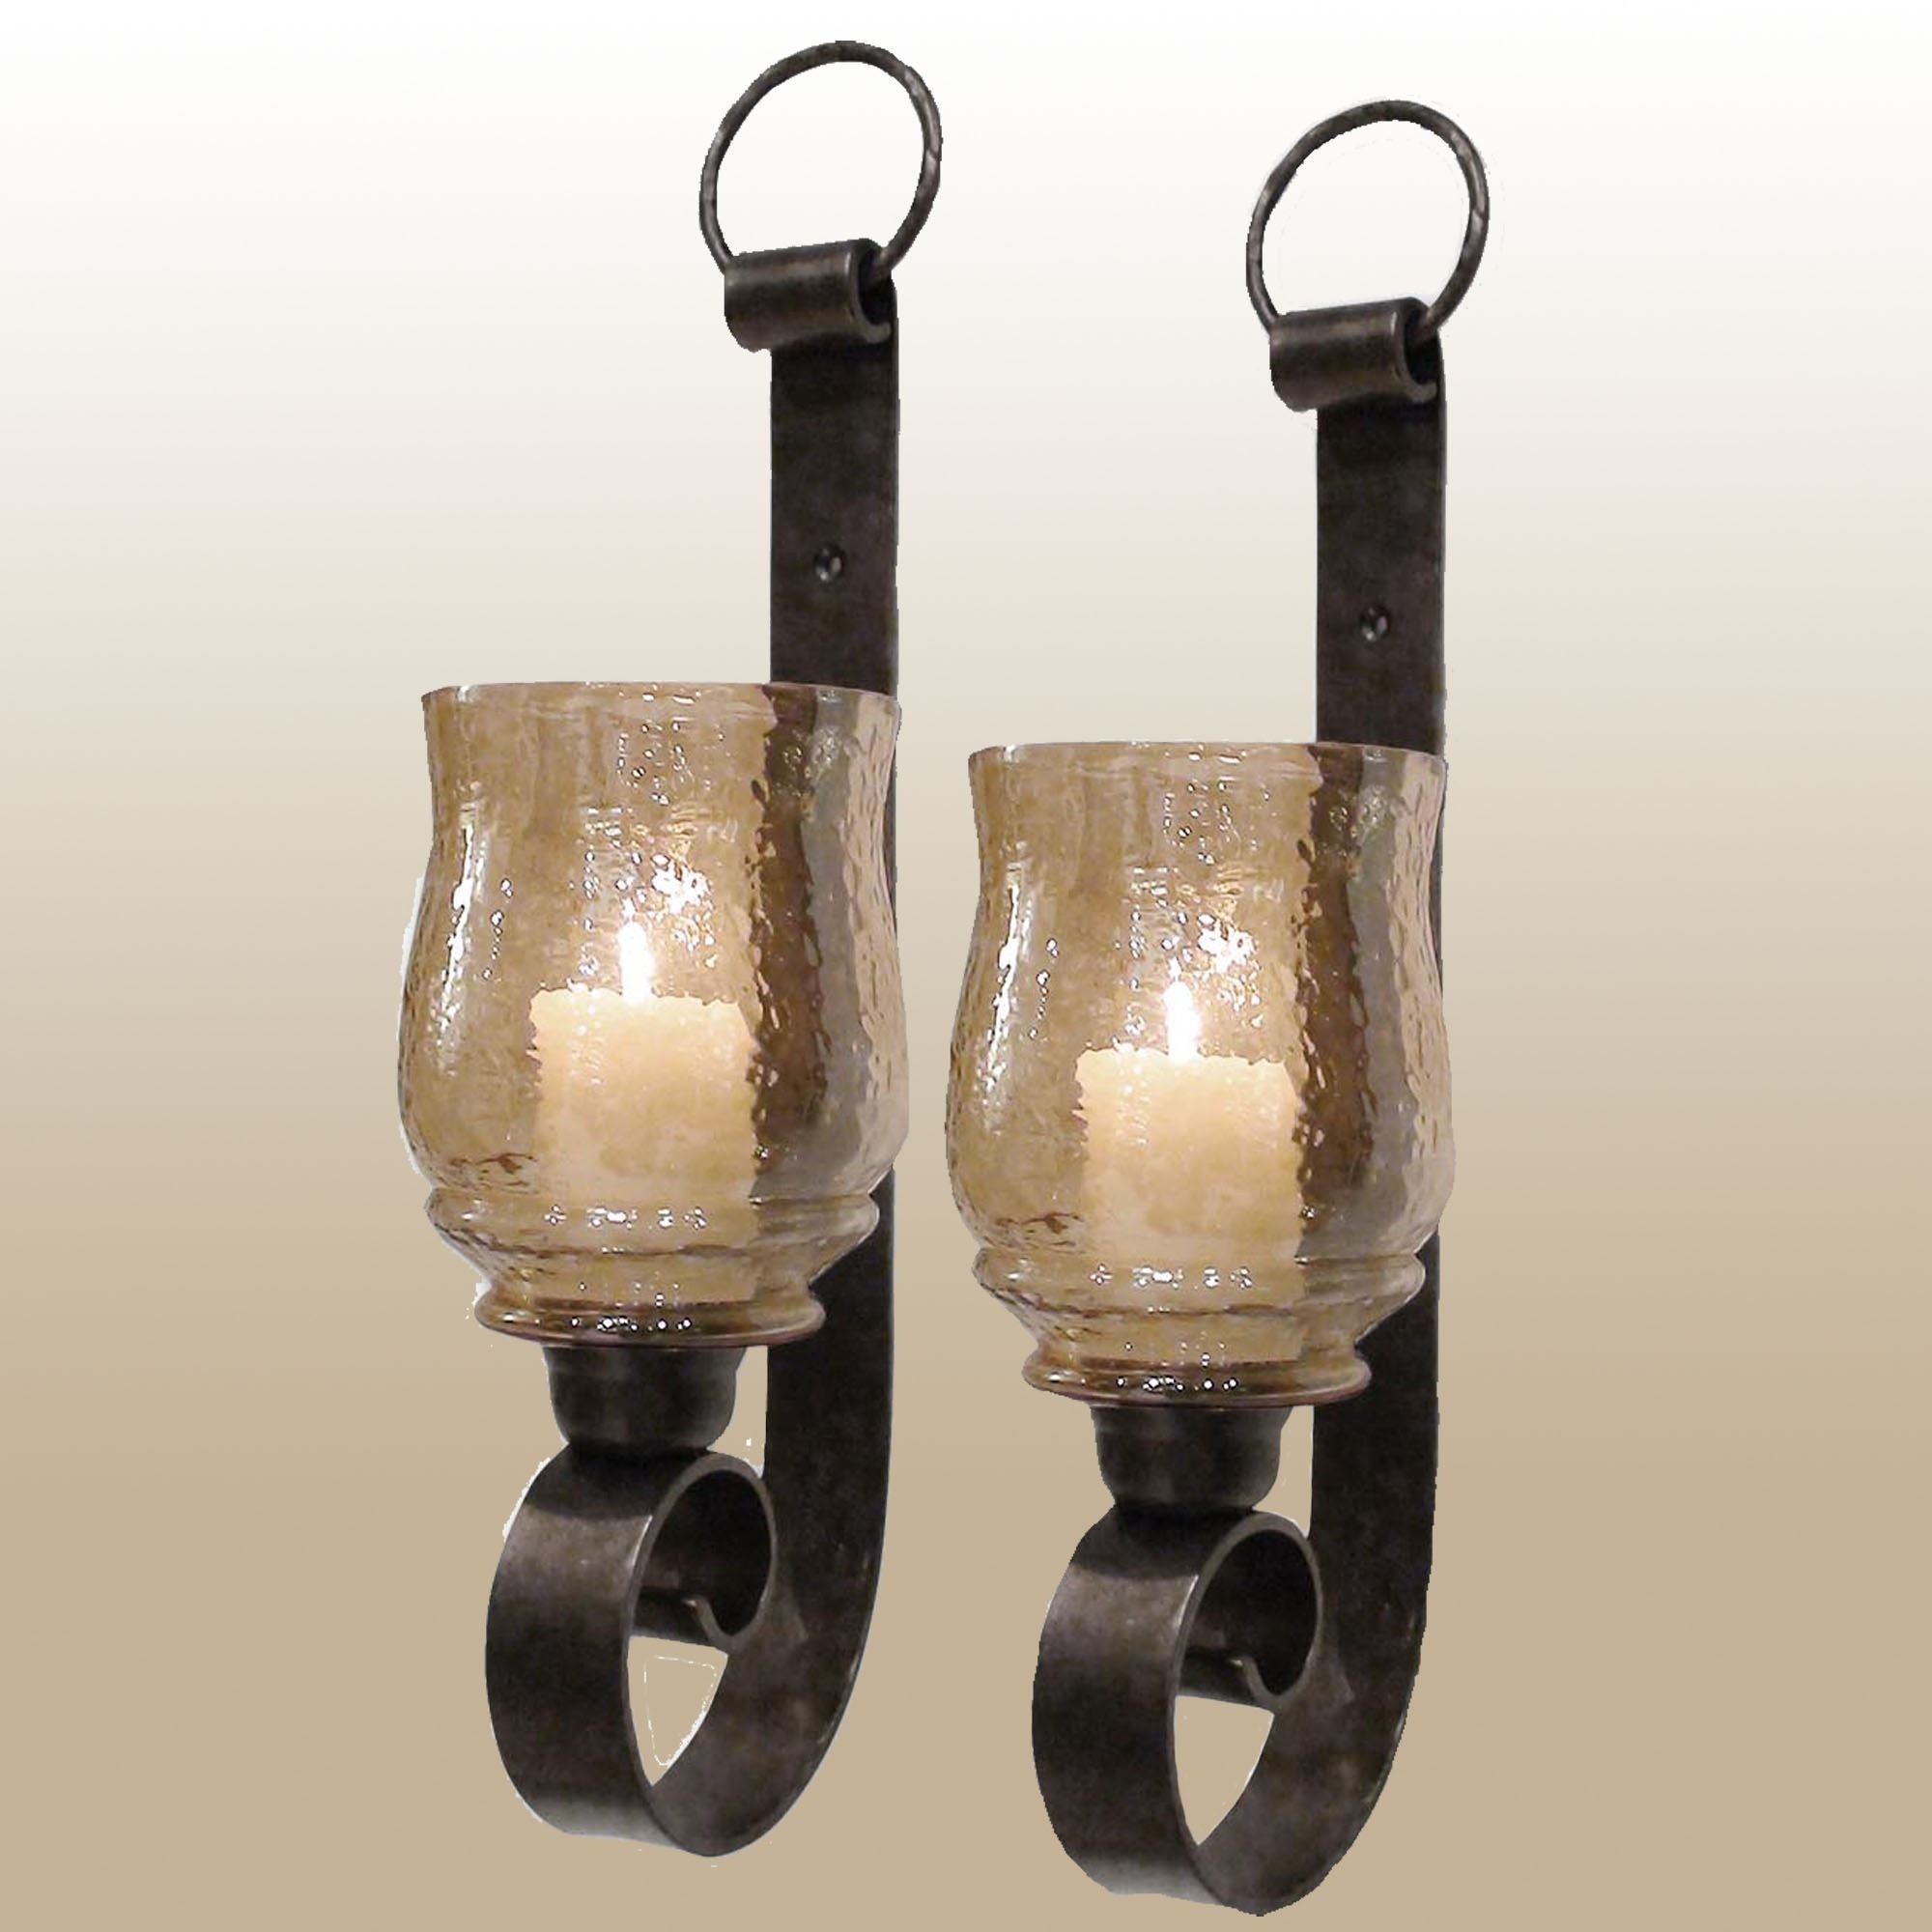 Dashielle hurricane wall sconce pair with candles